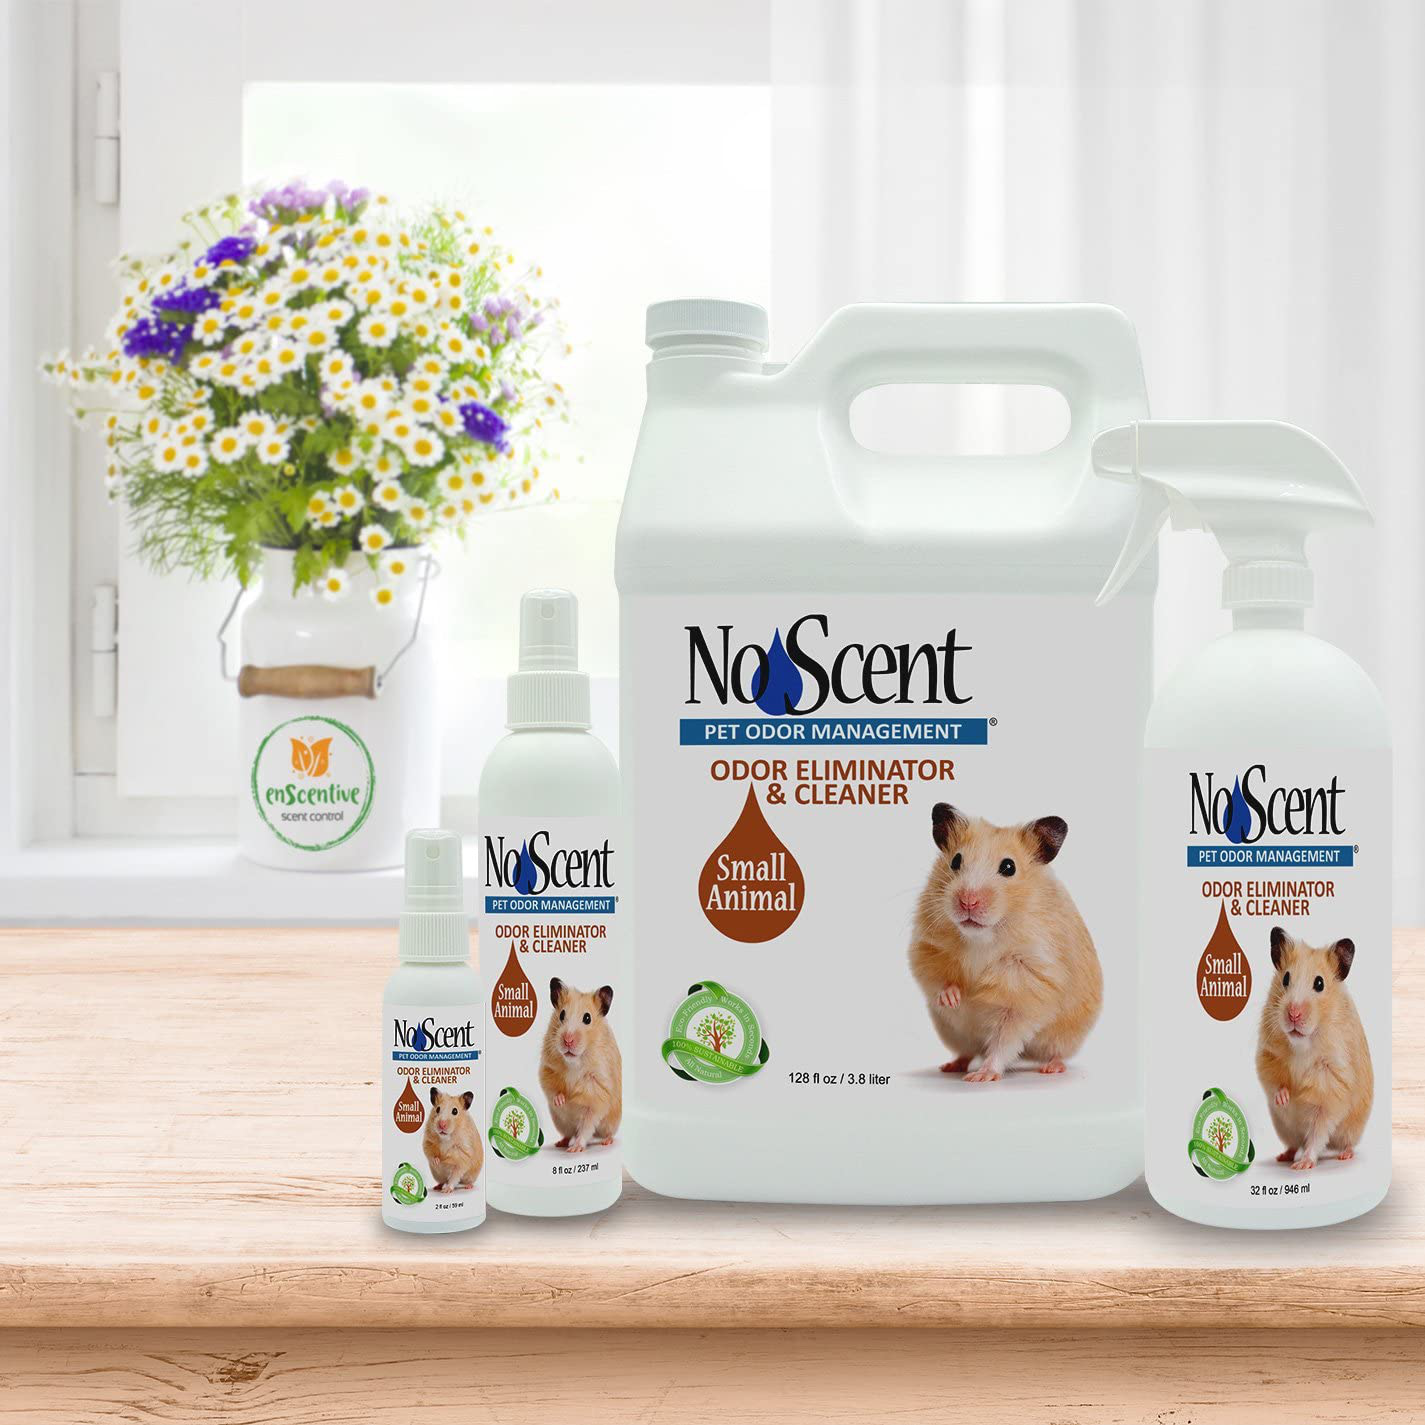 No Scent Small Animal - Professional Pet Waste Odor Eliminator & Cleaner - Safe All Natural Probiotic & Enzyme Formula Smell Remover for Hutches Tanks Enclosures Bedding Toys and Surfaces